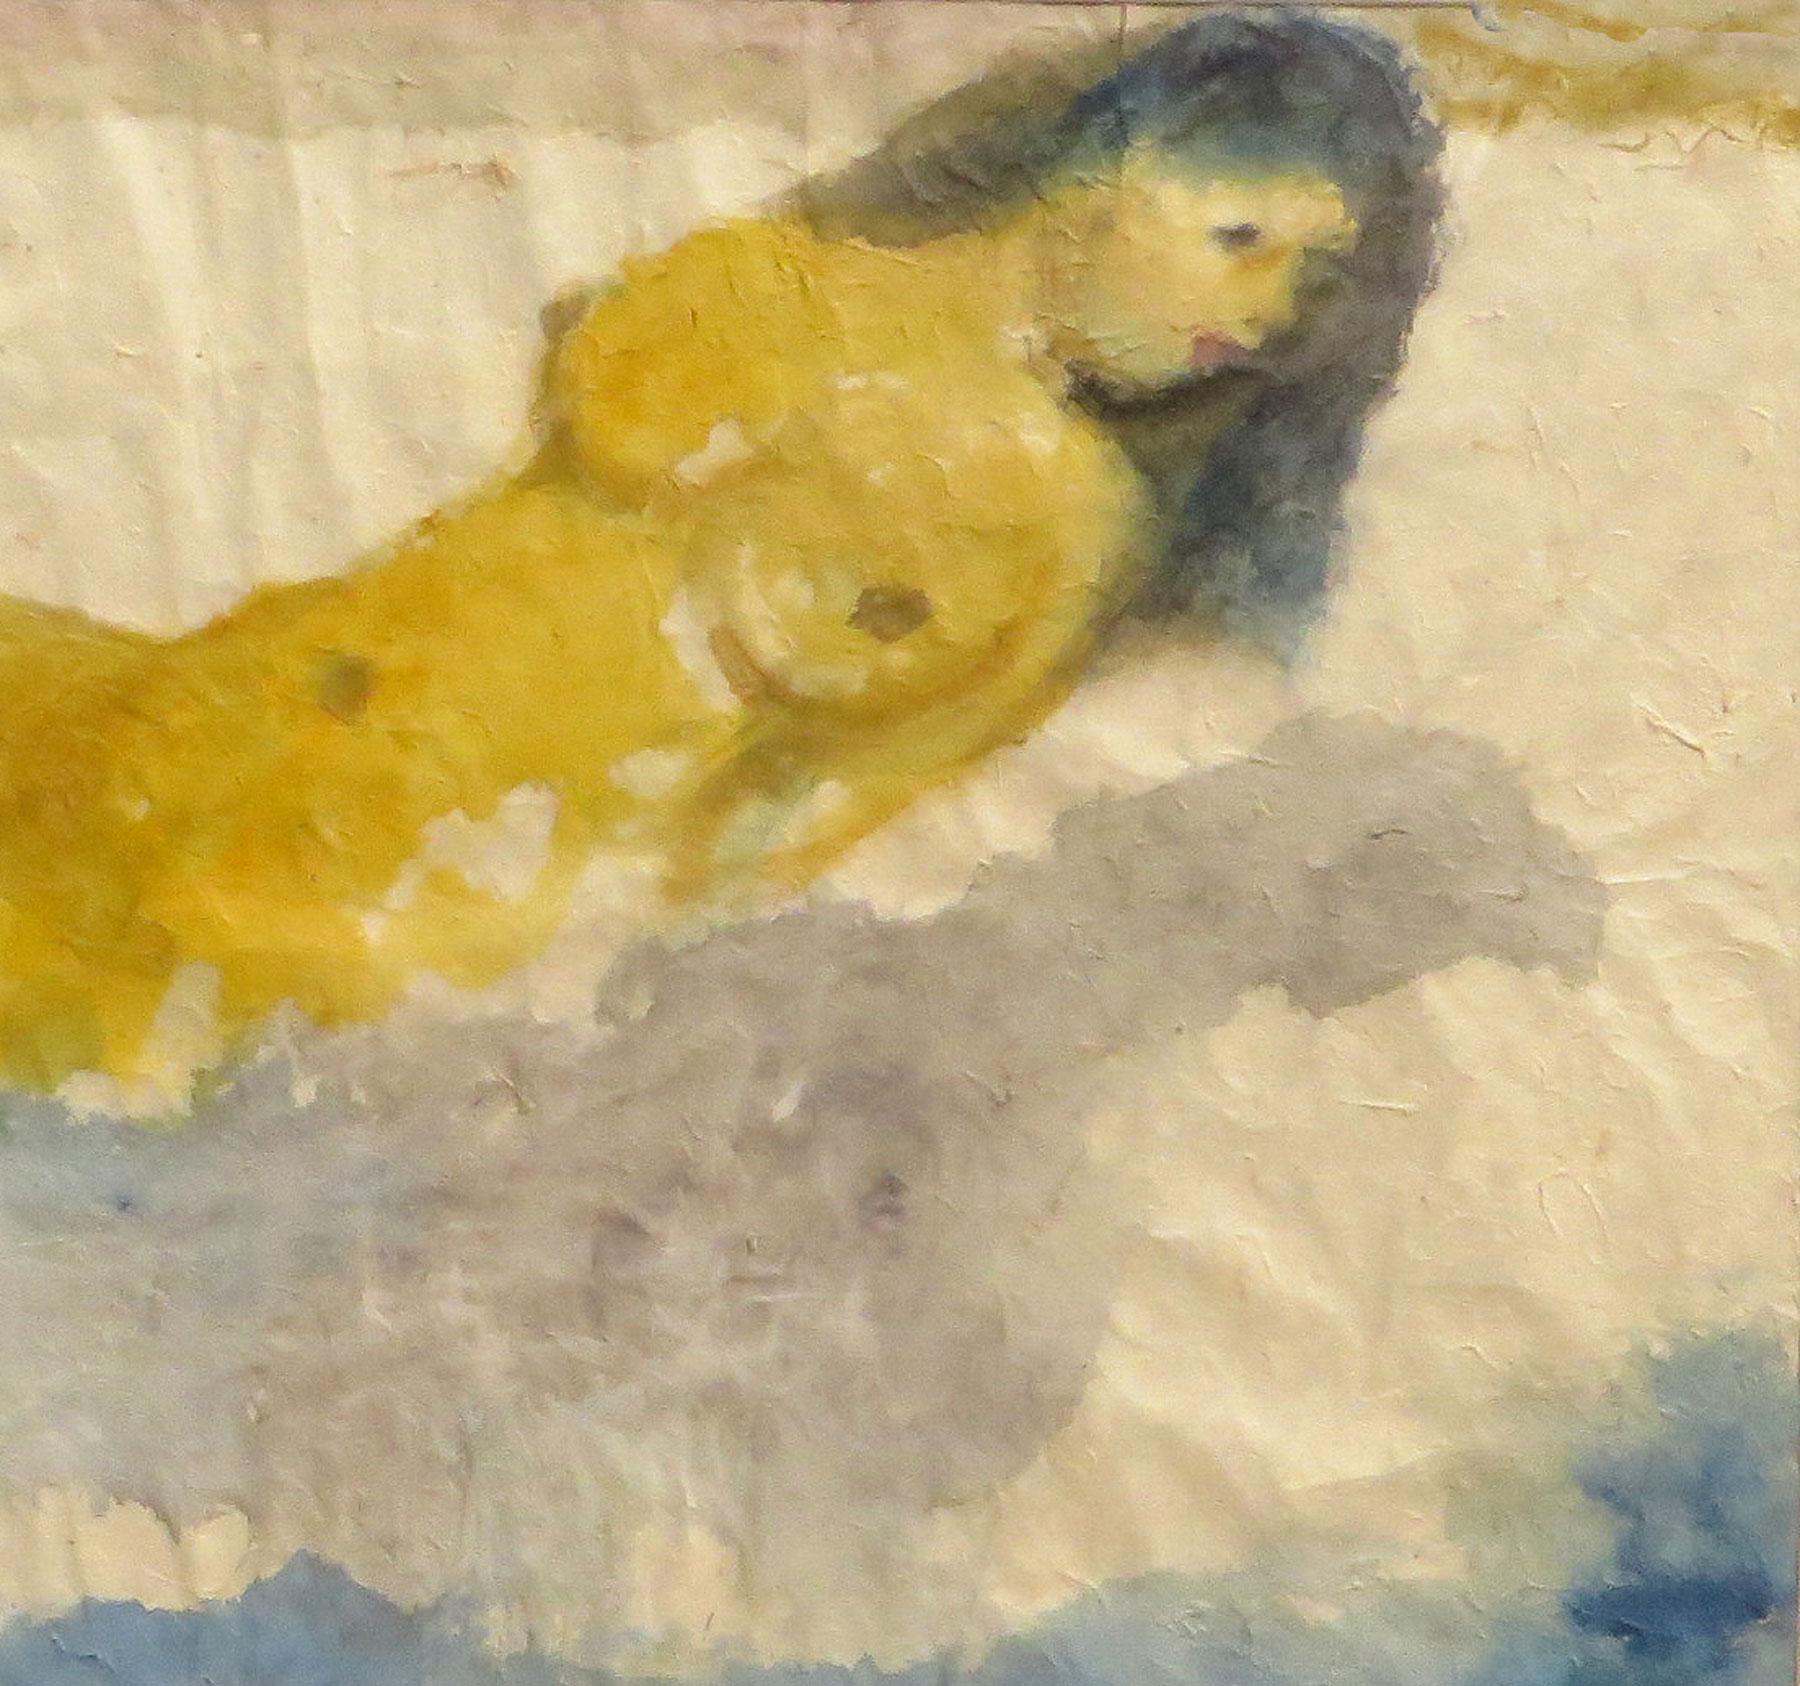 Nude Woman Bathing, Reclining, Watercolor, Blue, Yellow by K.C. Pyne 